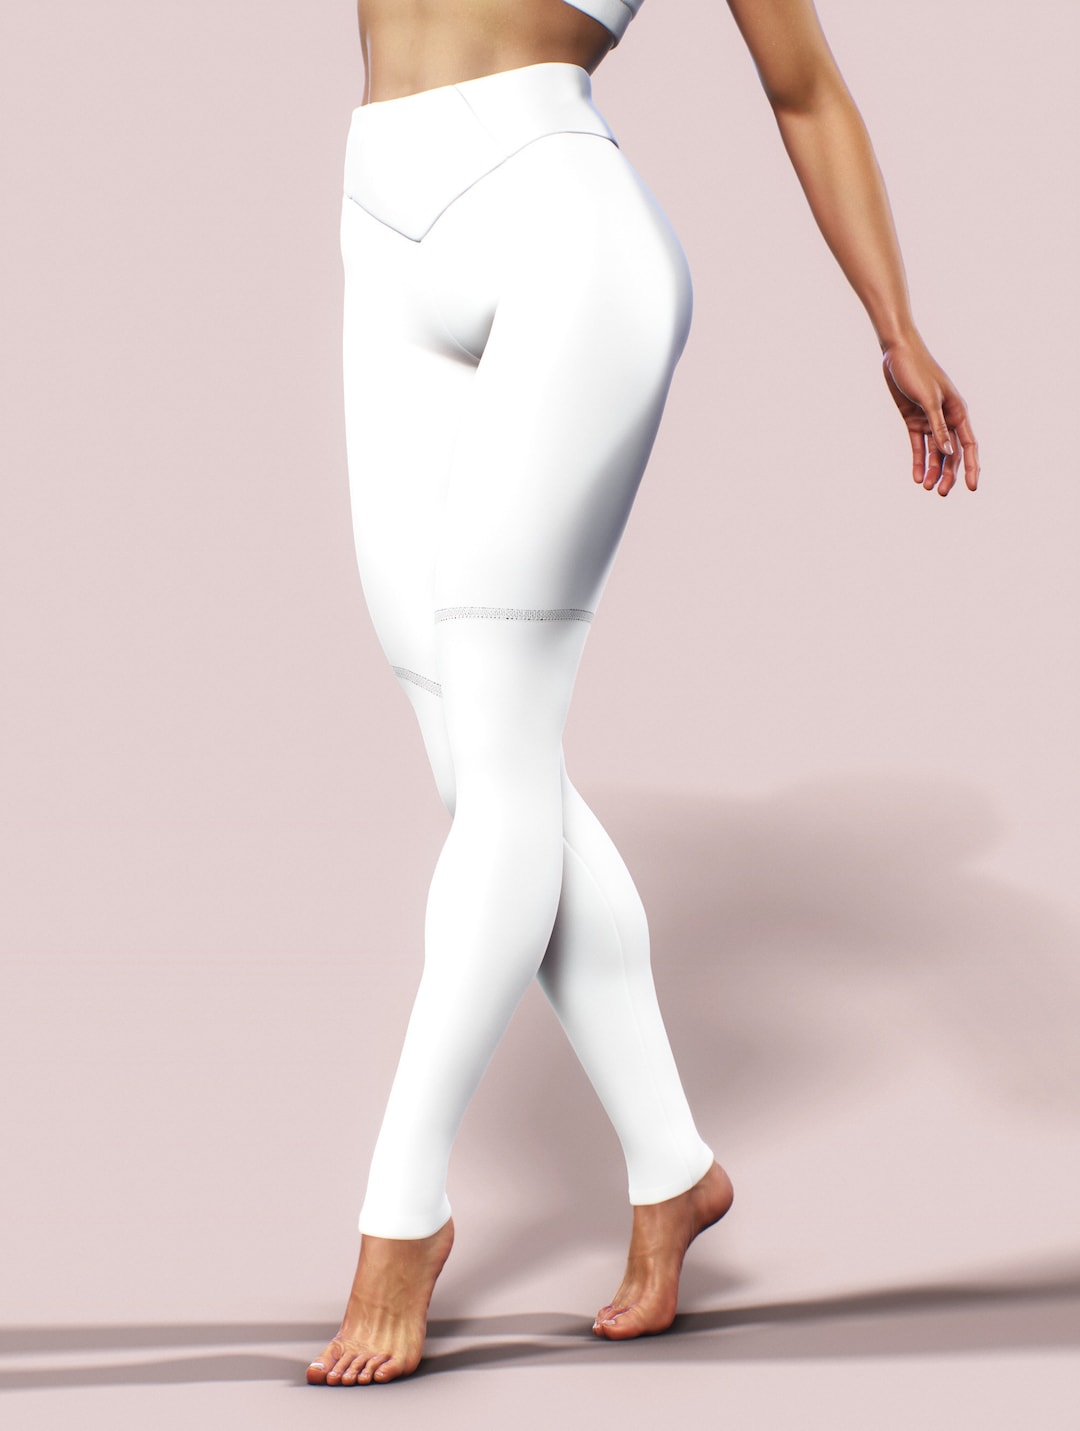 Solid White Non See Through Leggings Plain Simple High Waist Gym Yoga Pants  Booty Shaping Activewear Women Workout Clothing Fitness 